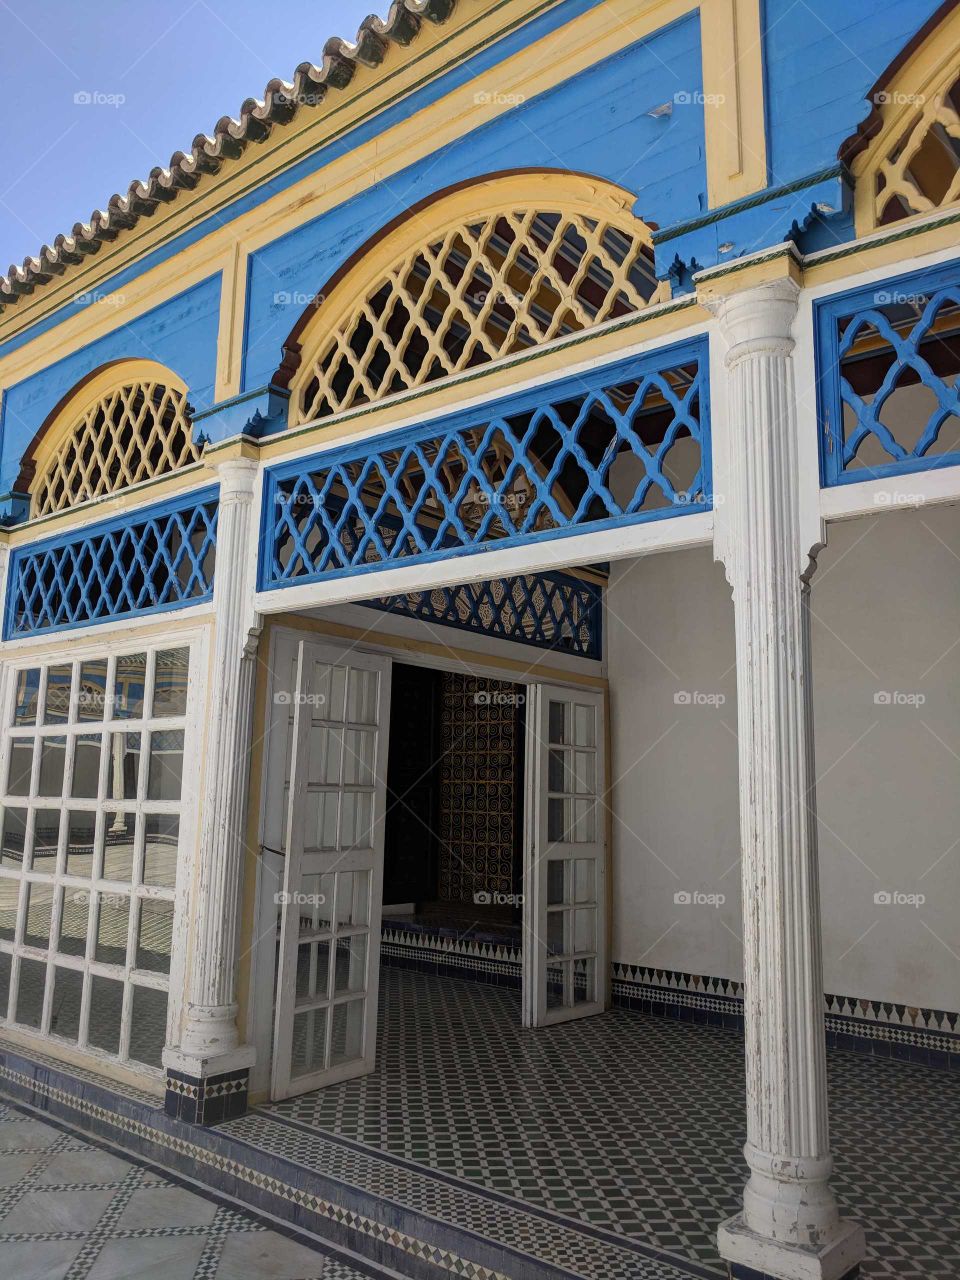 Beautiful, Ornate Blue and Yellow Detailing on the Arches Above the White Wooden Door (with Glass Windows) and Tiled Ceramic Mosaic Floors in the Courtyard of the Bahia Palace in Marrakech in Morocco